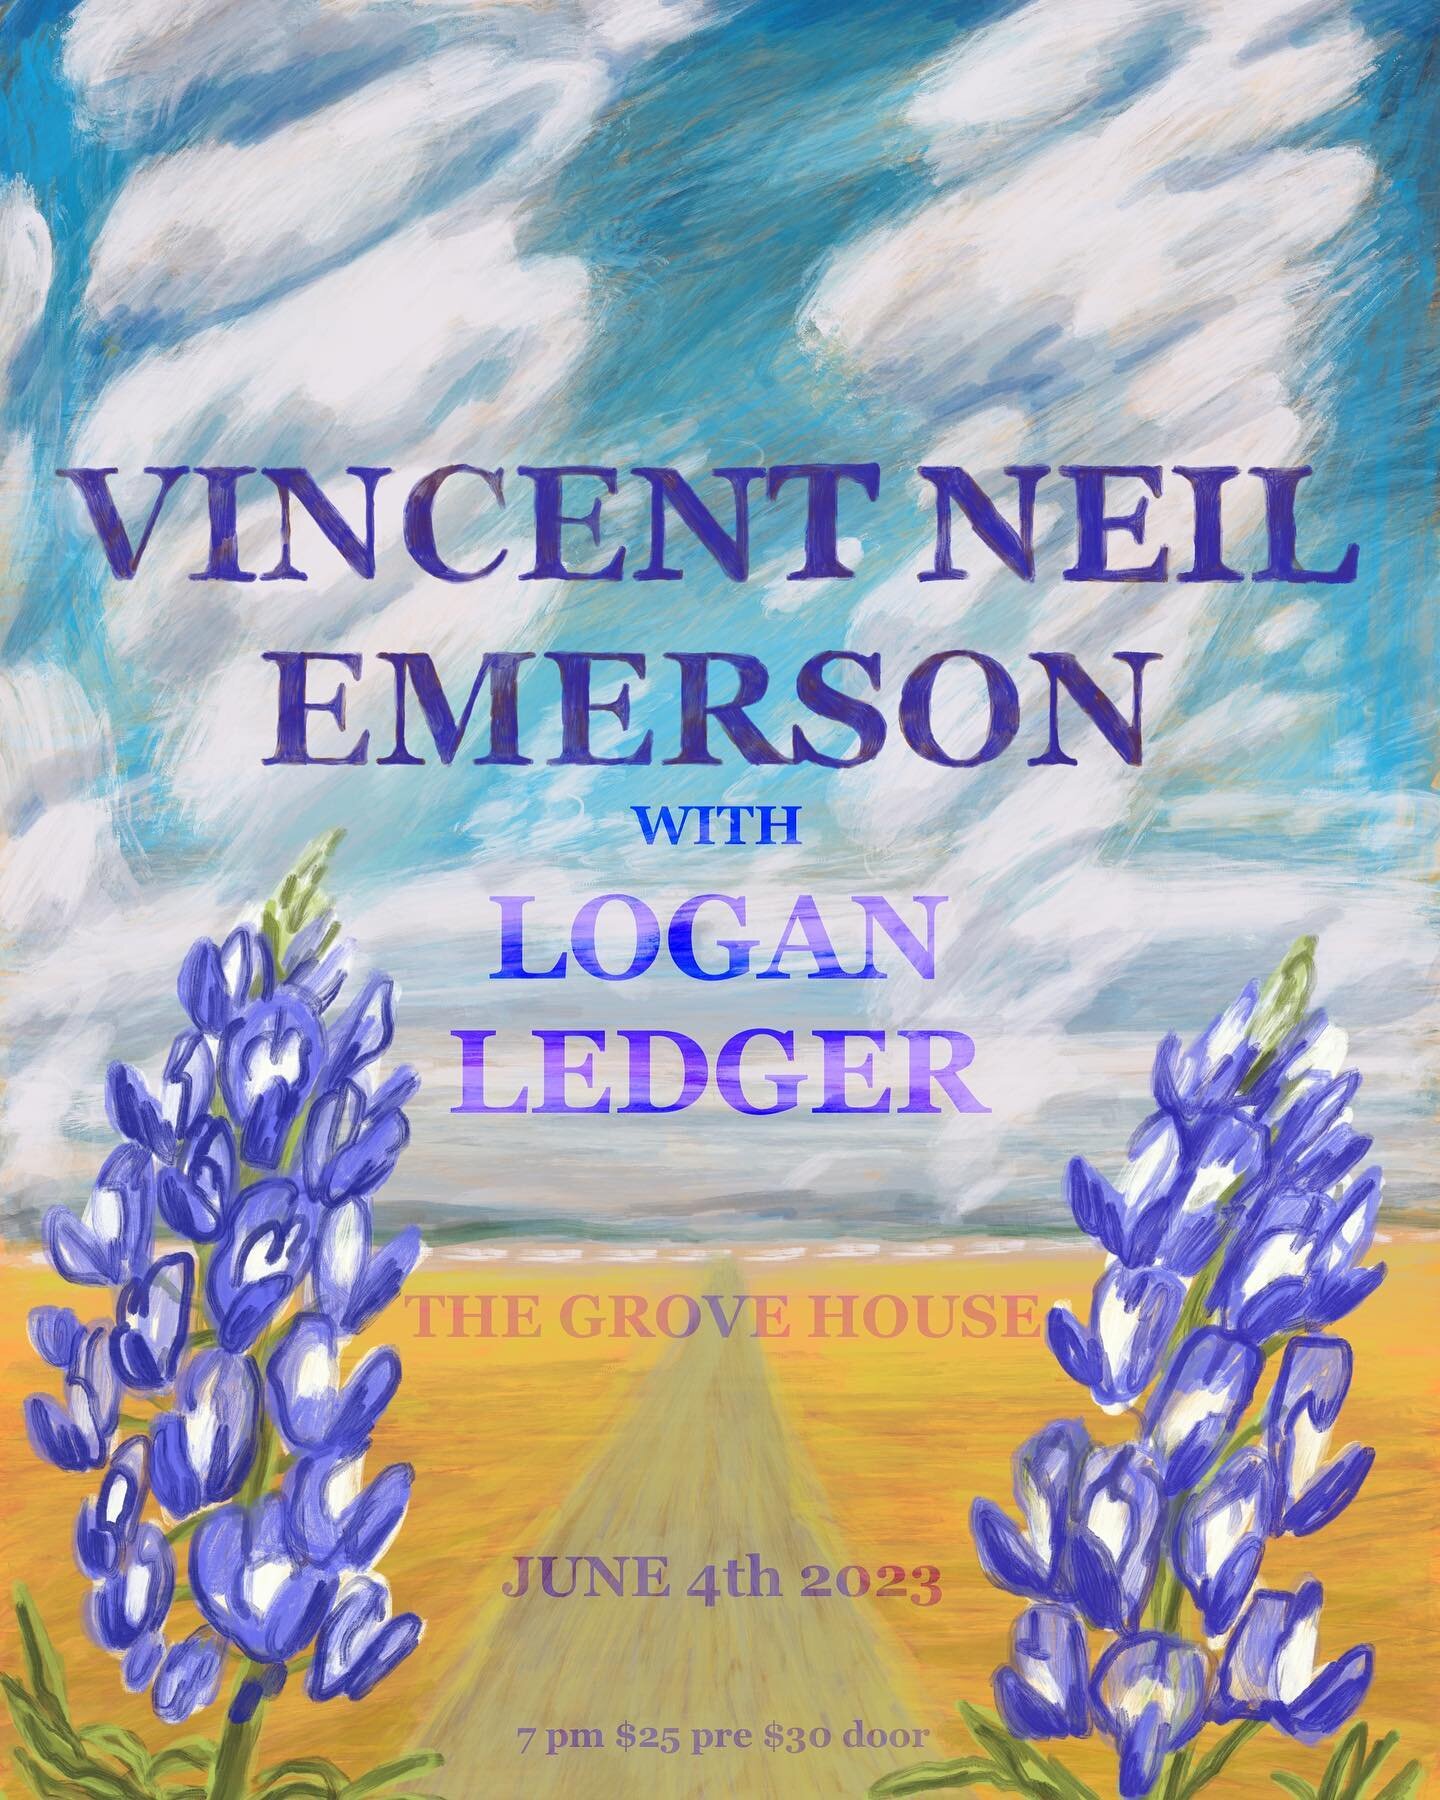 This bill with @vincentneilemerson and @loganledger is too good. If you&rsquo;ve hung out with Nate in the last few years we&rsquo;re sure he&rsquo;s preached their music to you. Get your tickets on eventbrite. The show is Sunday 6/4. Don&rsquo;t mis